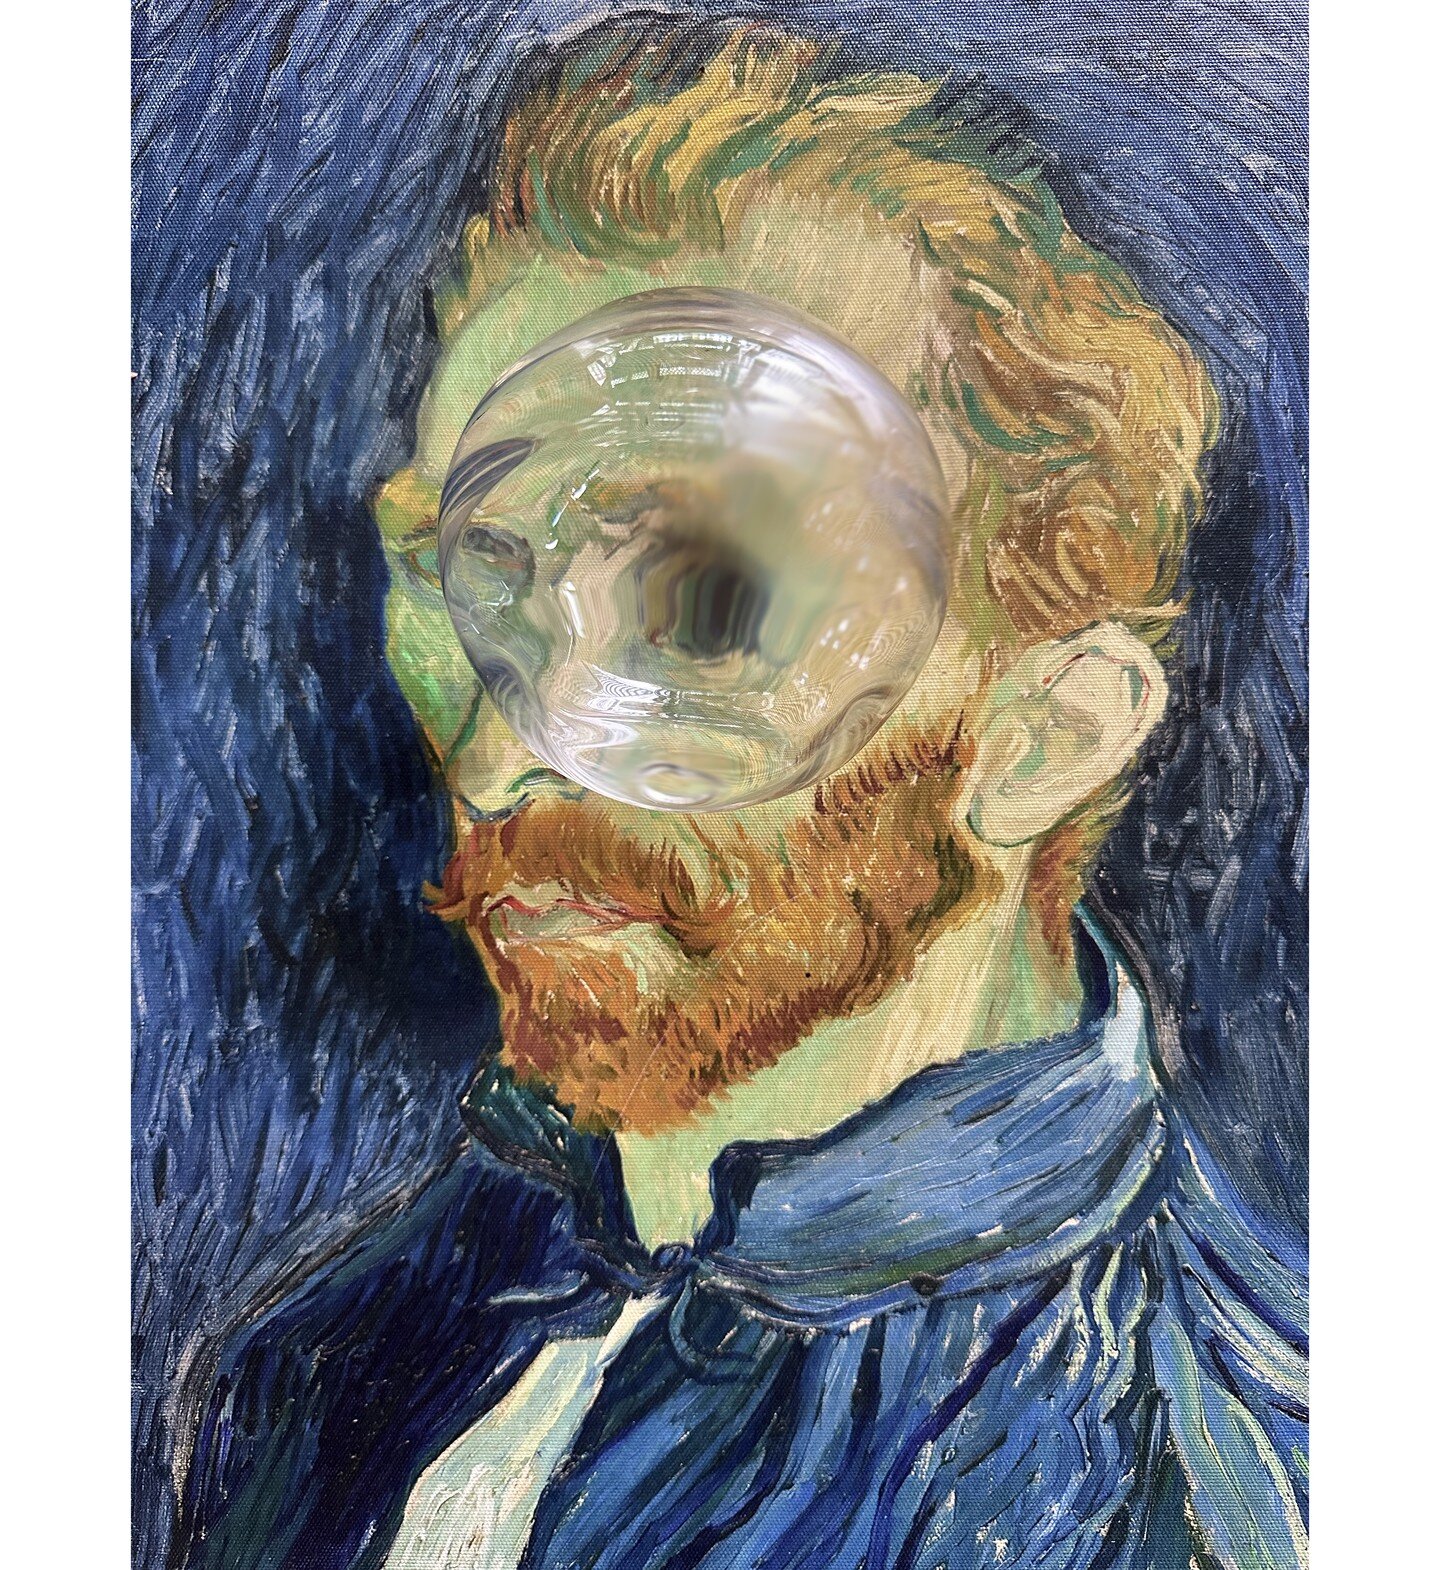 Vincent, with hand blown glass, the shape is slightly irregular which creates endless distortions and shapes out of the flat surface. #glassart #conceptualart #famousartist #vangoghart #multi-mediaart